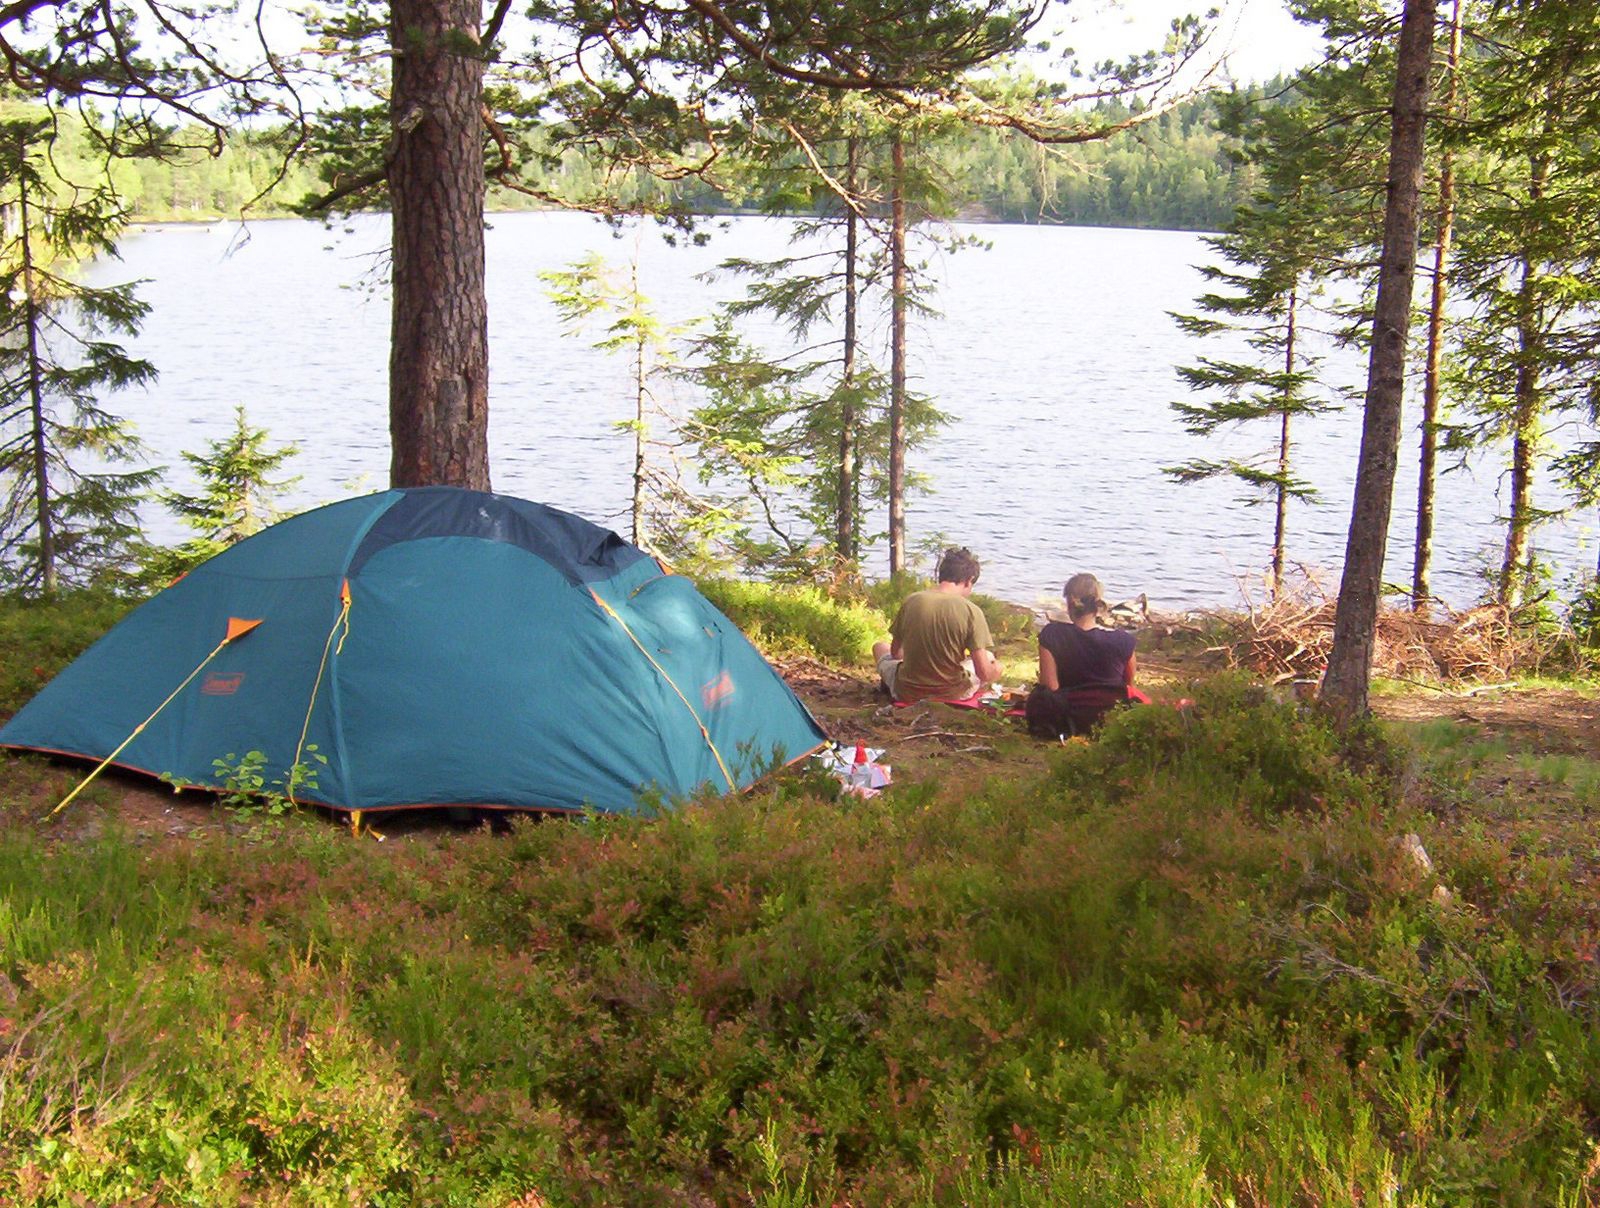 Tent pitched in a forrest at a lake with two persons in front of it having a picknick